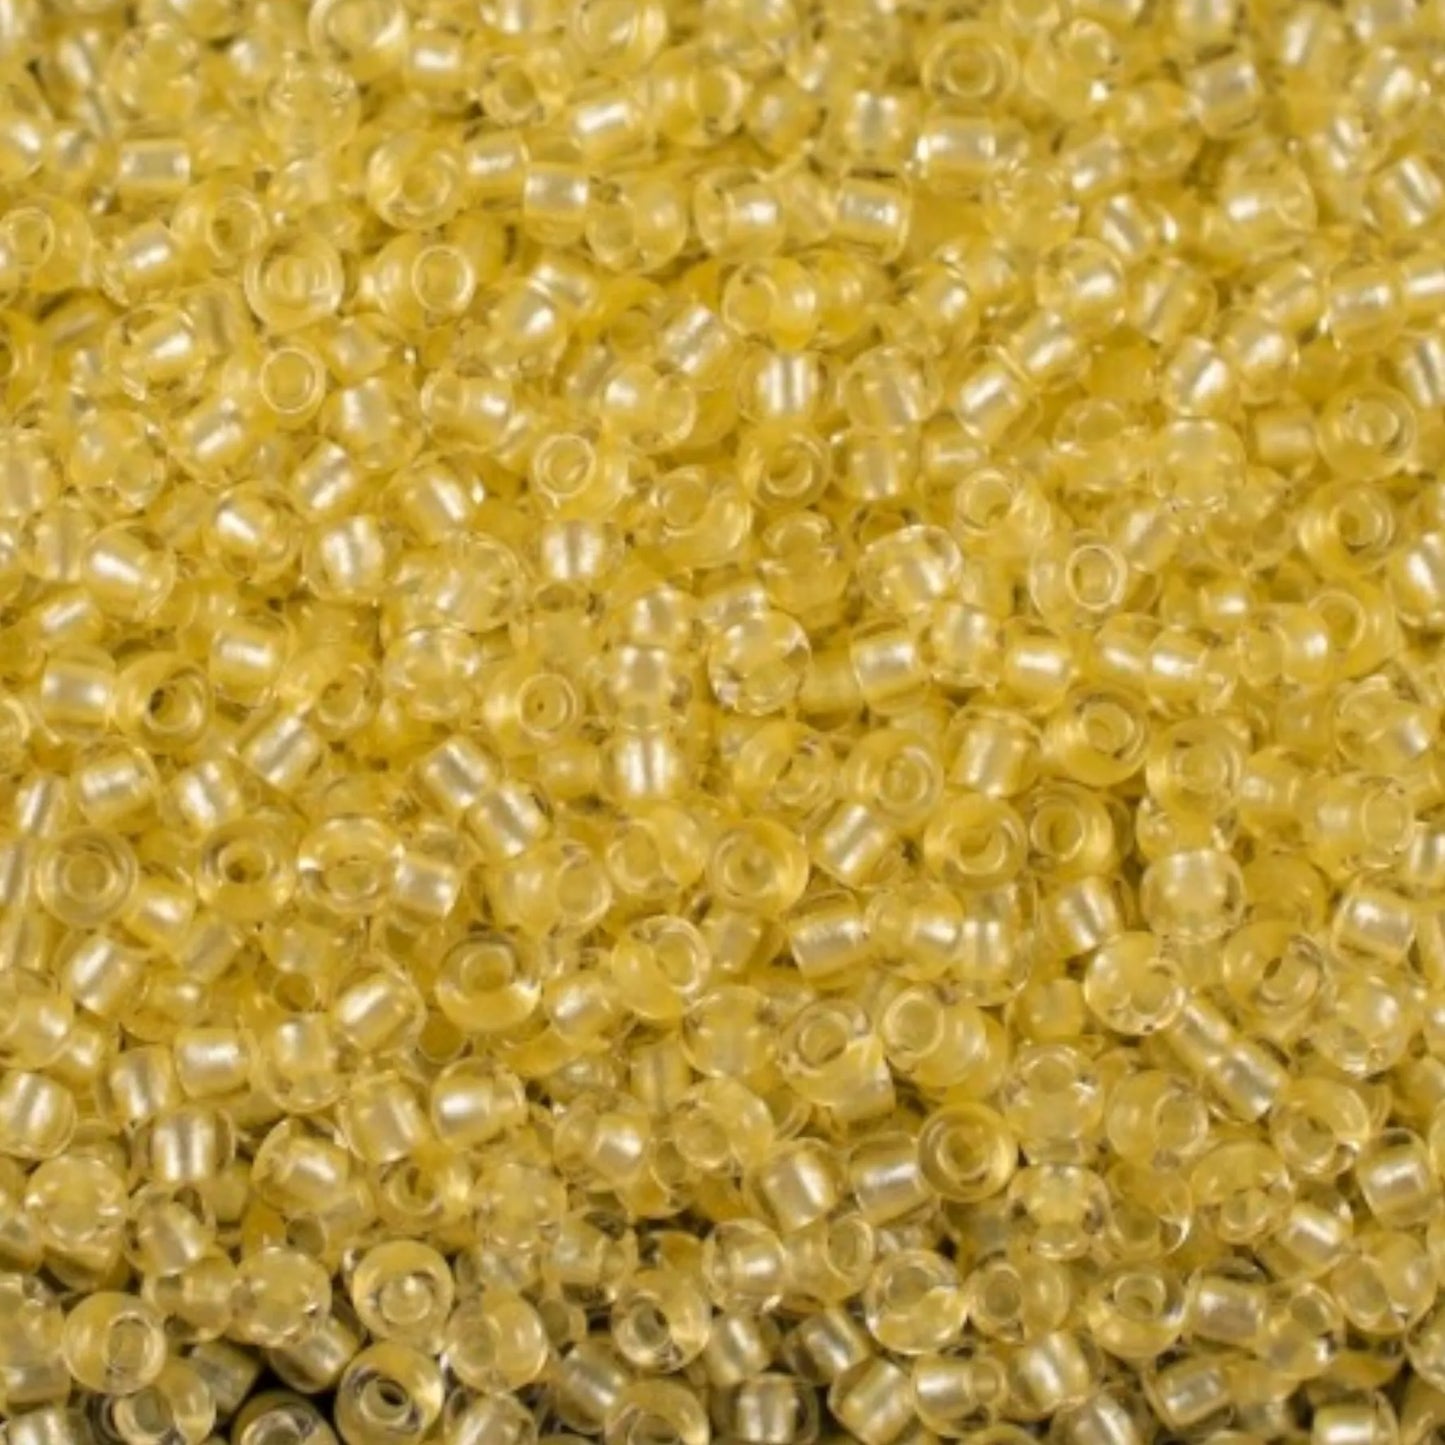 38286 Czech seed beads PRECIOSA Rocailles 10/0 yellow. Crystal - Terra Pearl Lined.